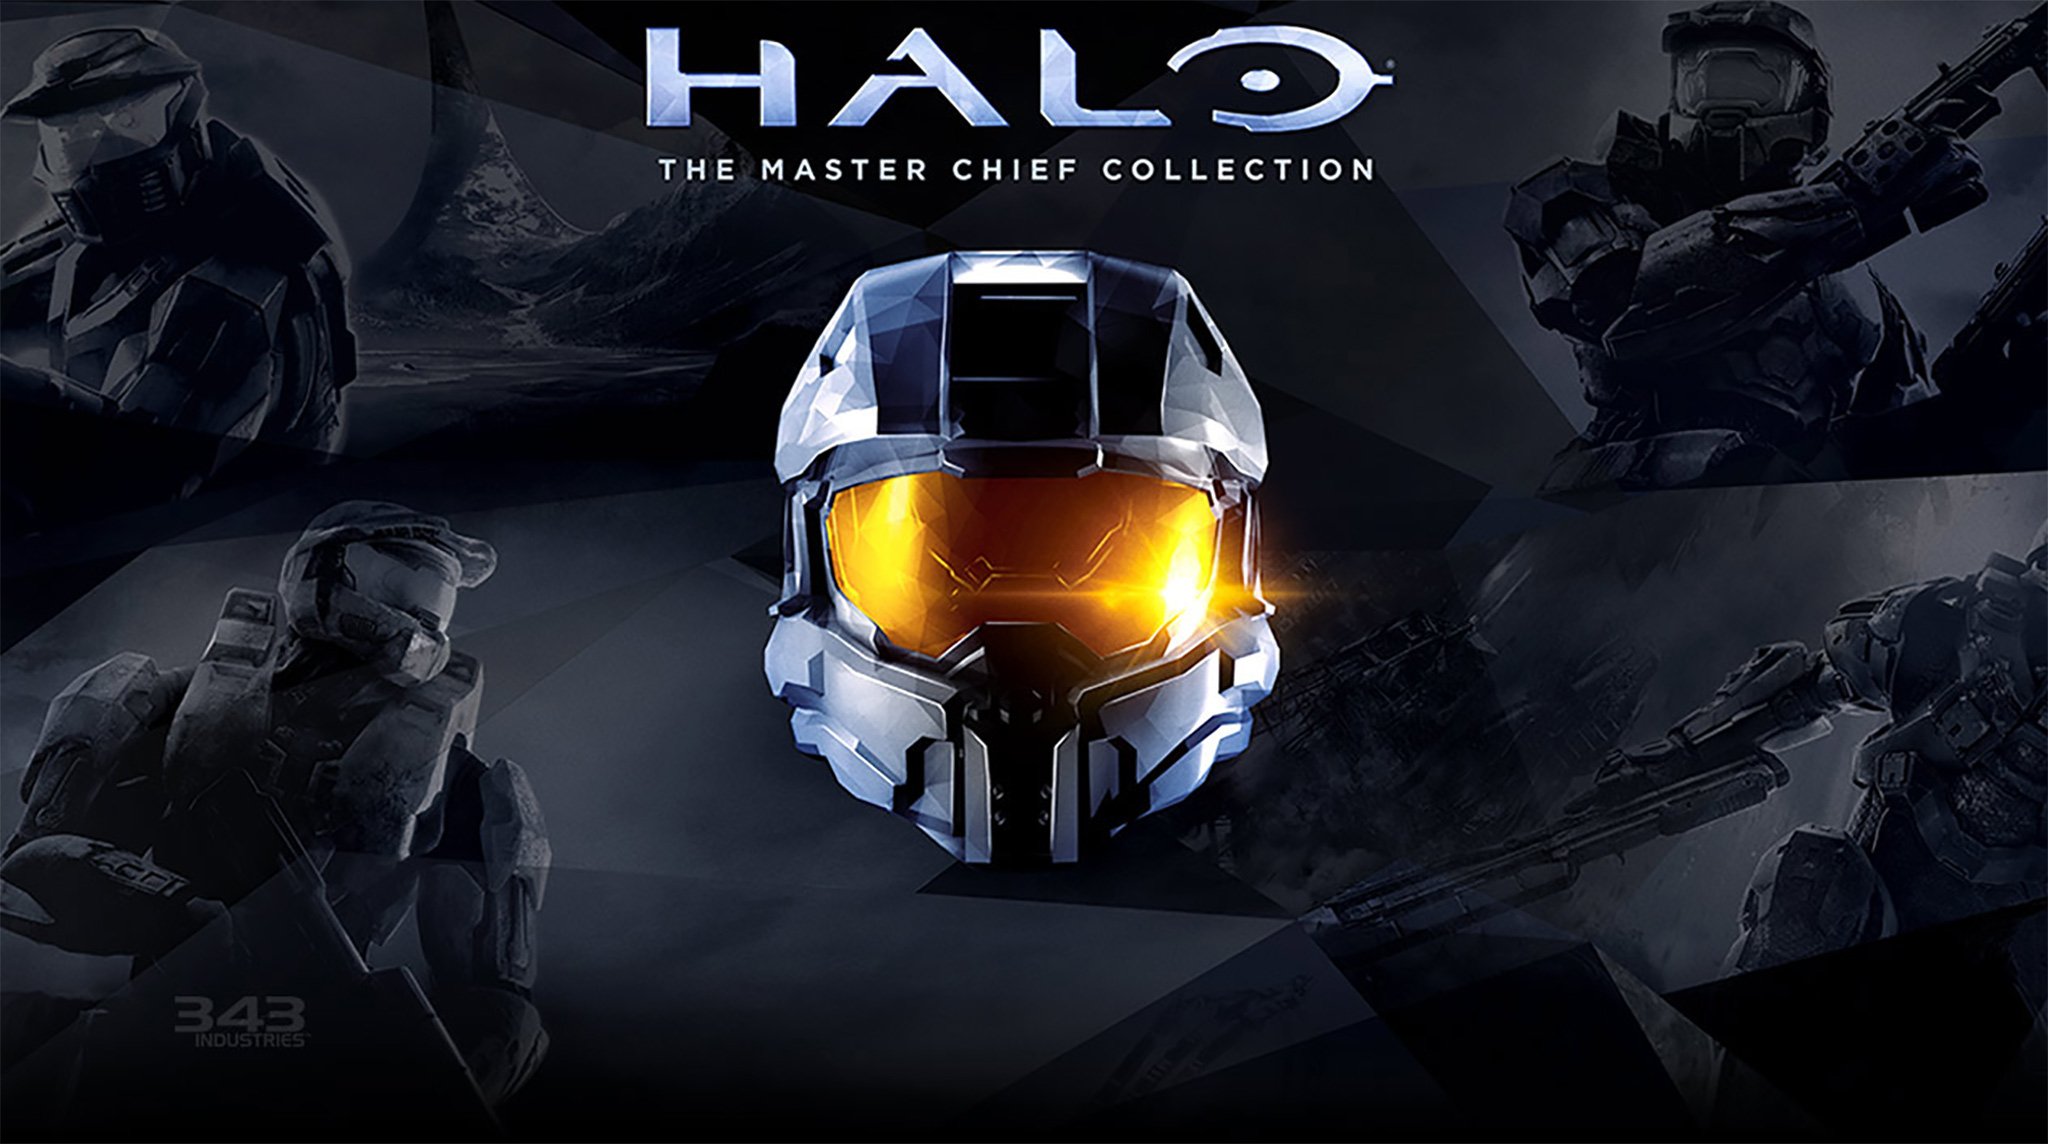 Halo and Master Chief are here to stay: 343 Industries dismisses